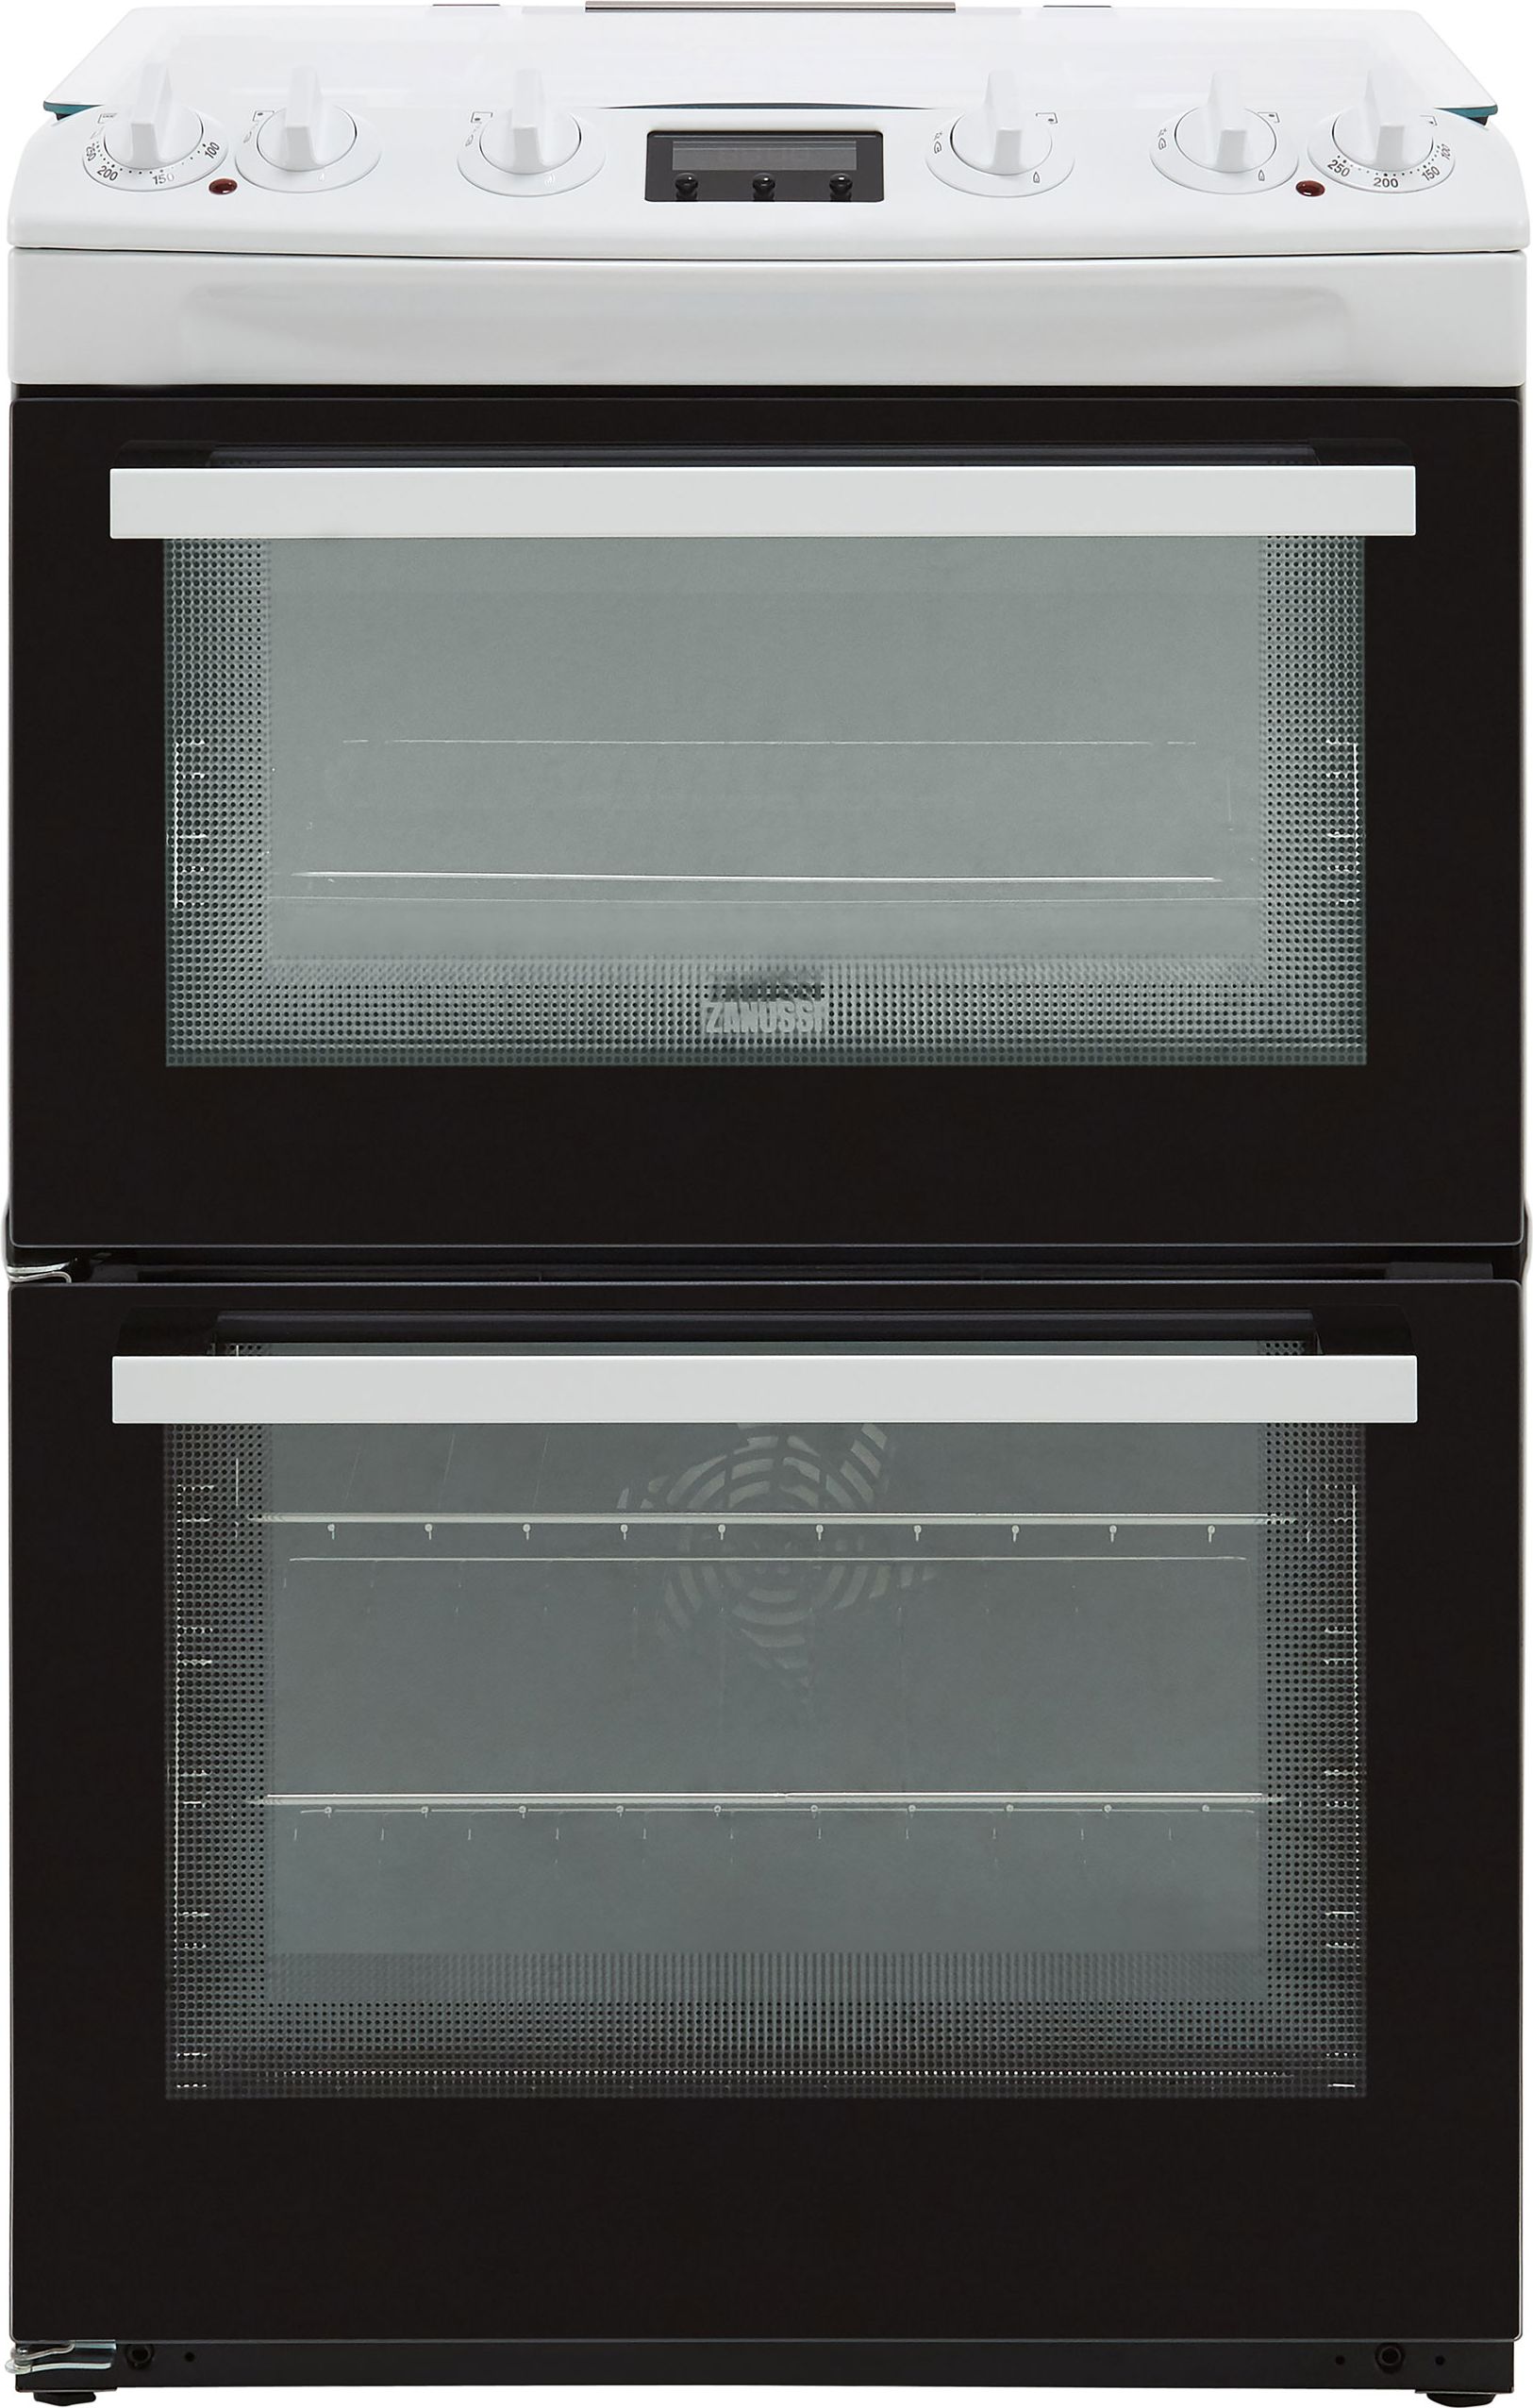 Zanussi ZCK66350WA 60cm Freestanding Dual Fuel Cooker - White - A/A Rated, White